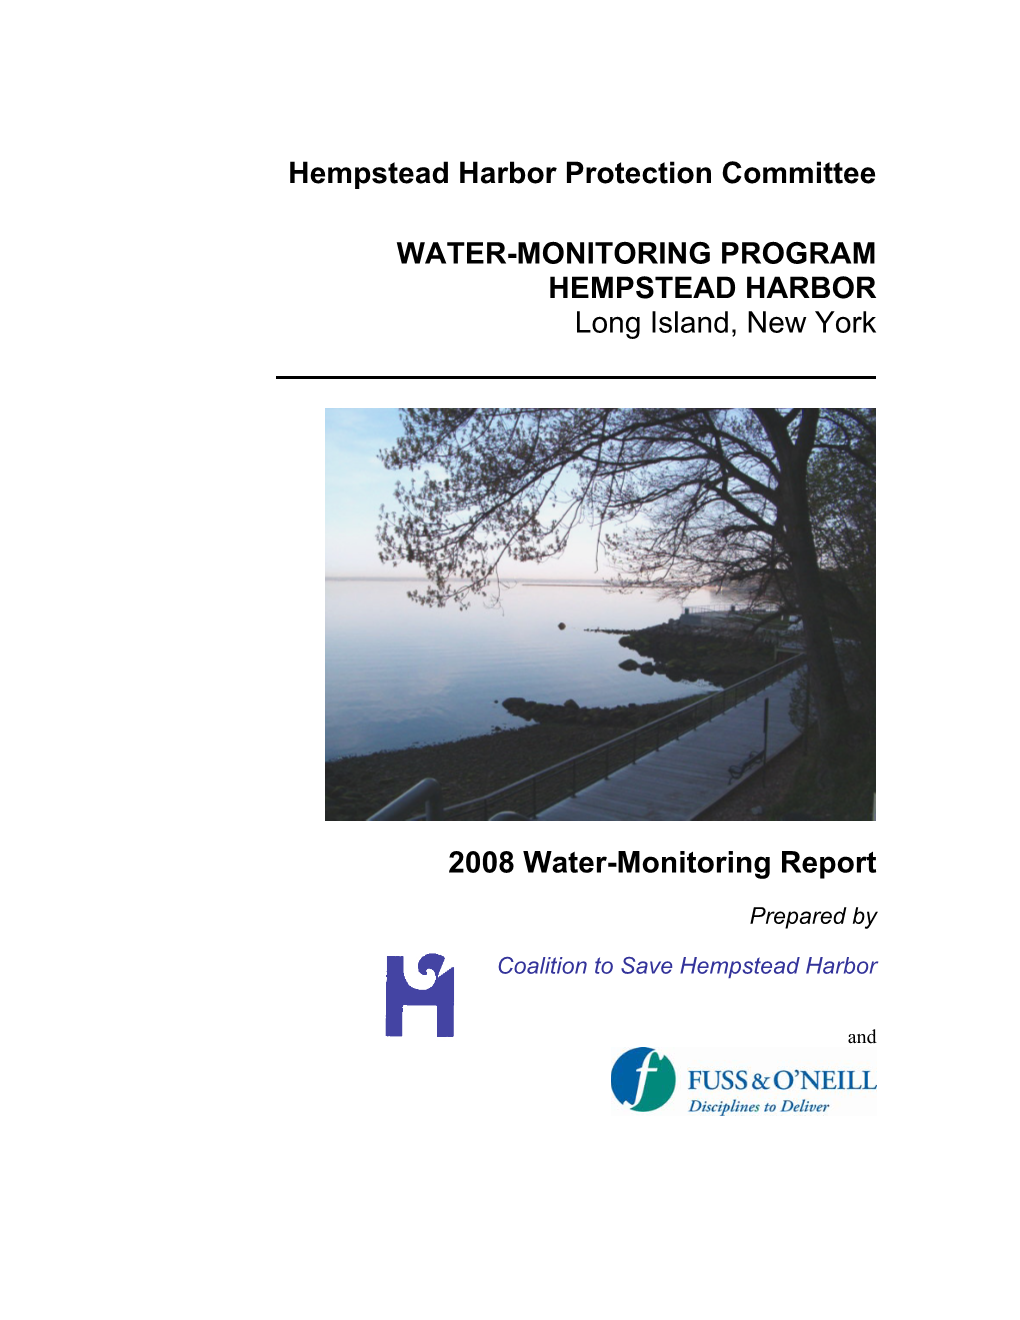 2008 Water-Quality Report for Hempstead Harbor